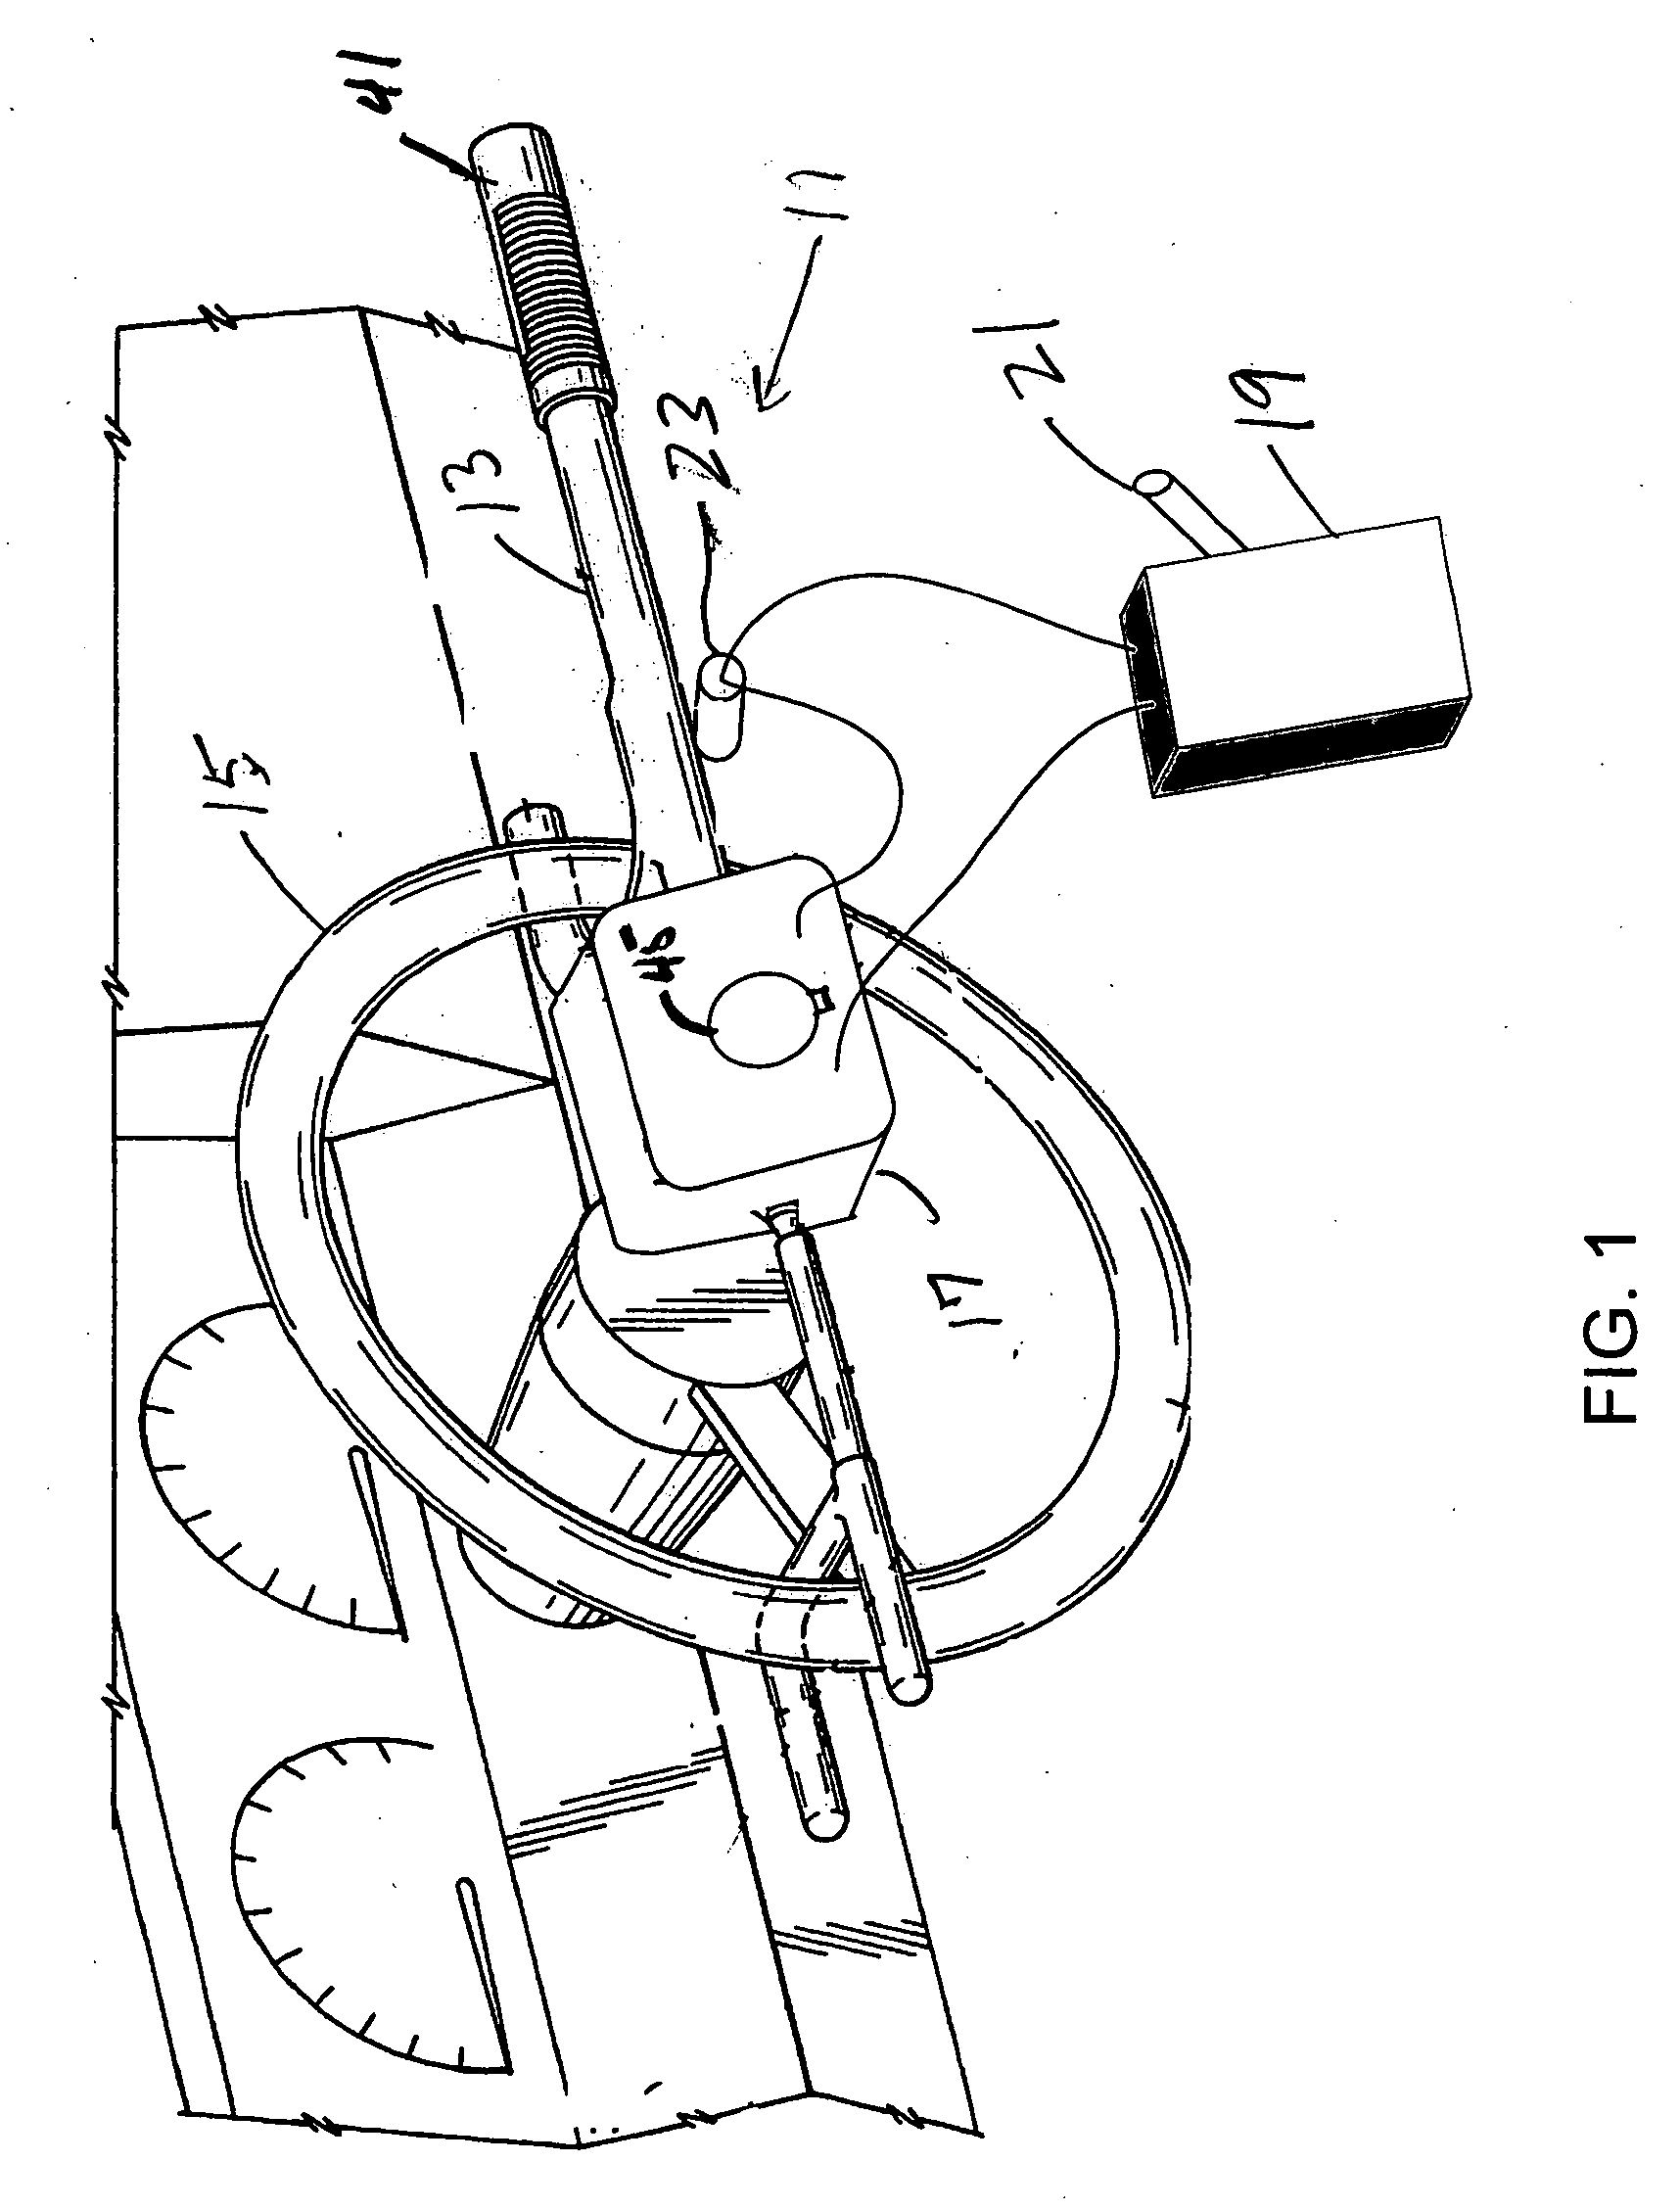 System for preventing driving while intoxicated